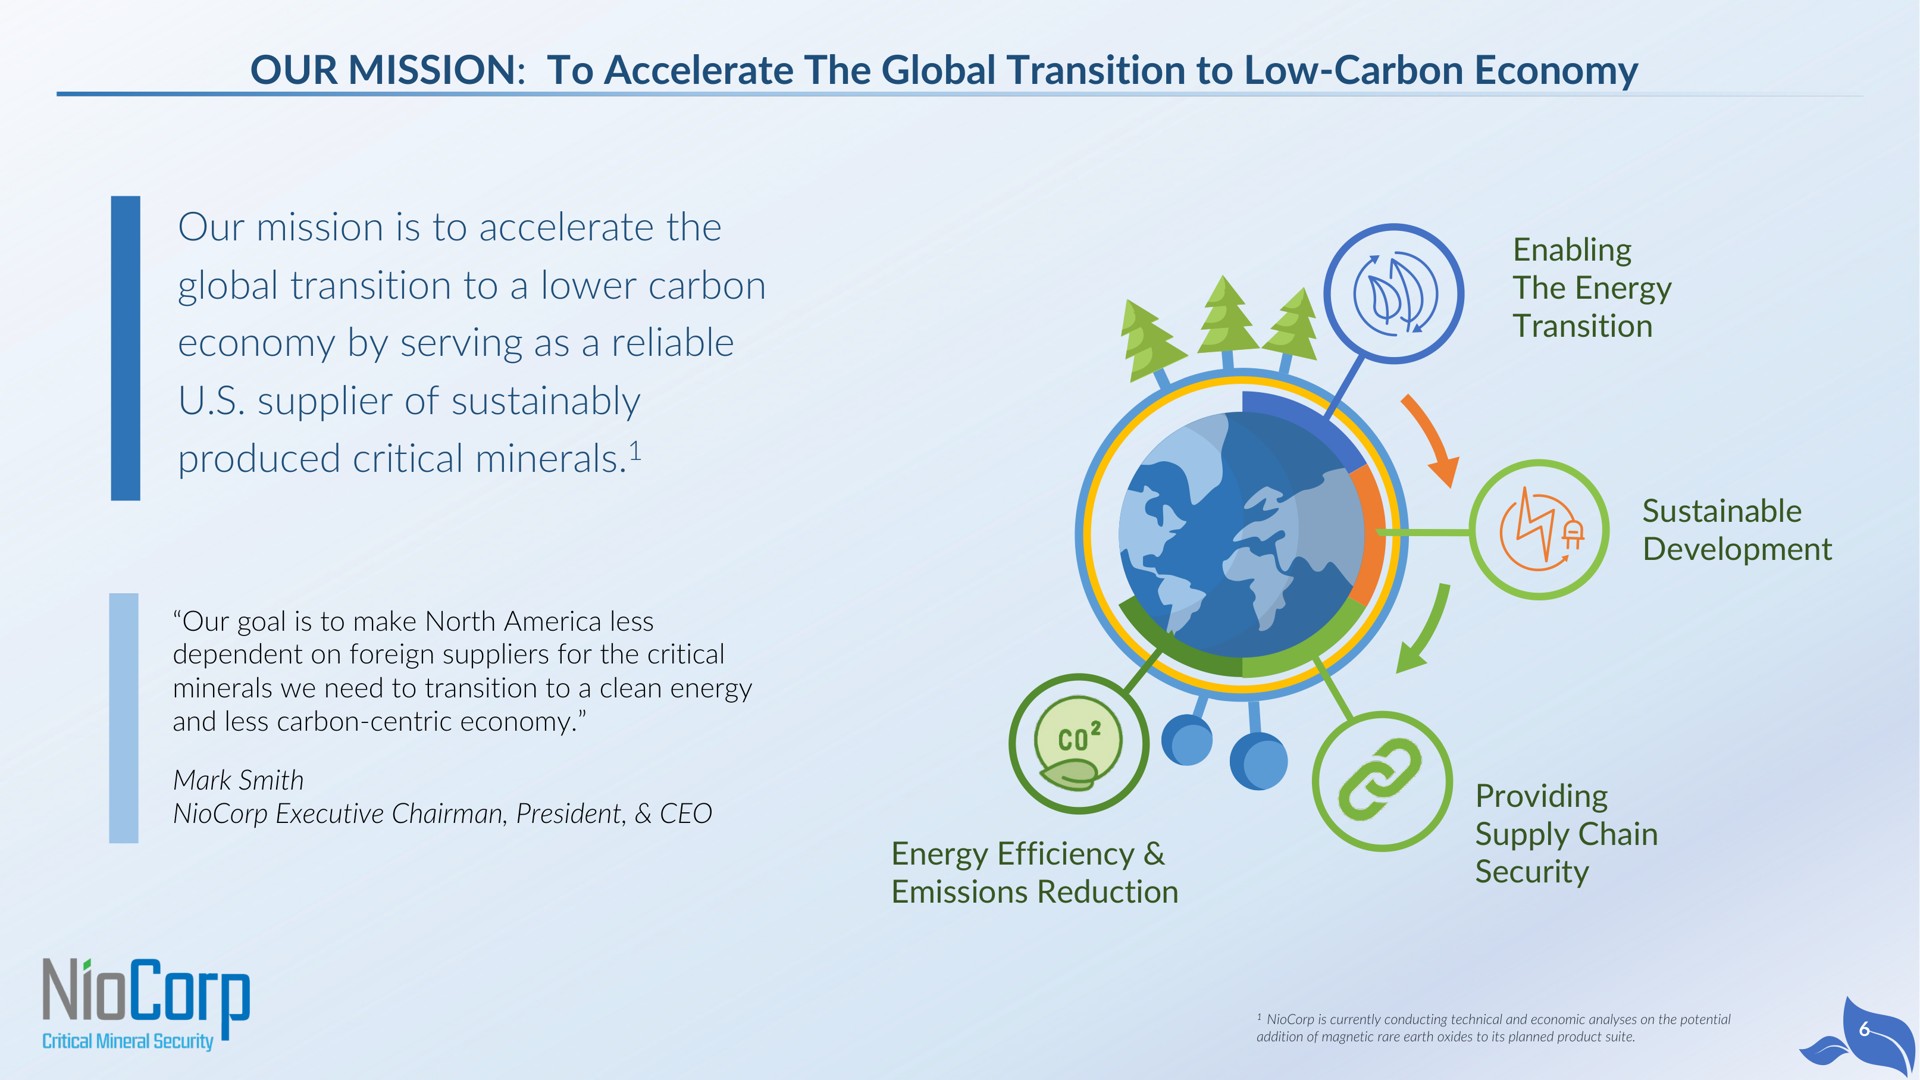 our mission to accelerate the global transition to low carbon economy our mission is to accelerate the global transition to a lower carbon economy by serving as a reliable supplier of produced critical minerals our goal is to make north less dependent on foreign suppliers for the critical minerals we need to transition to a clean energy and less carbon centric economy mark smith executive chairman president enabling the energy transition sustainable development energy efficiency emissions reduction providing supply chain security | NioCorp